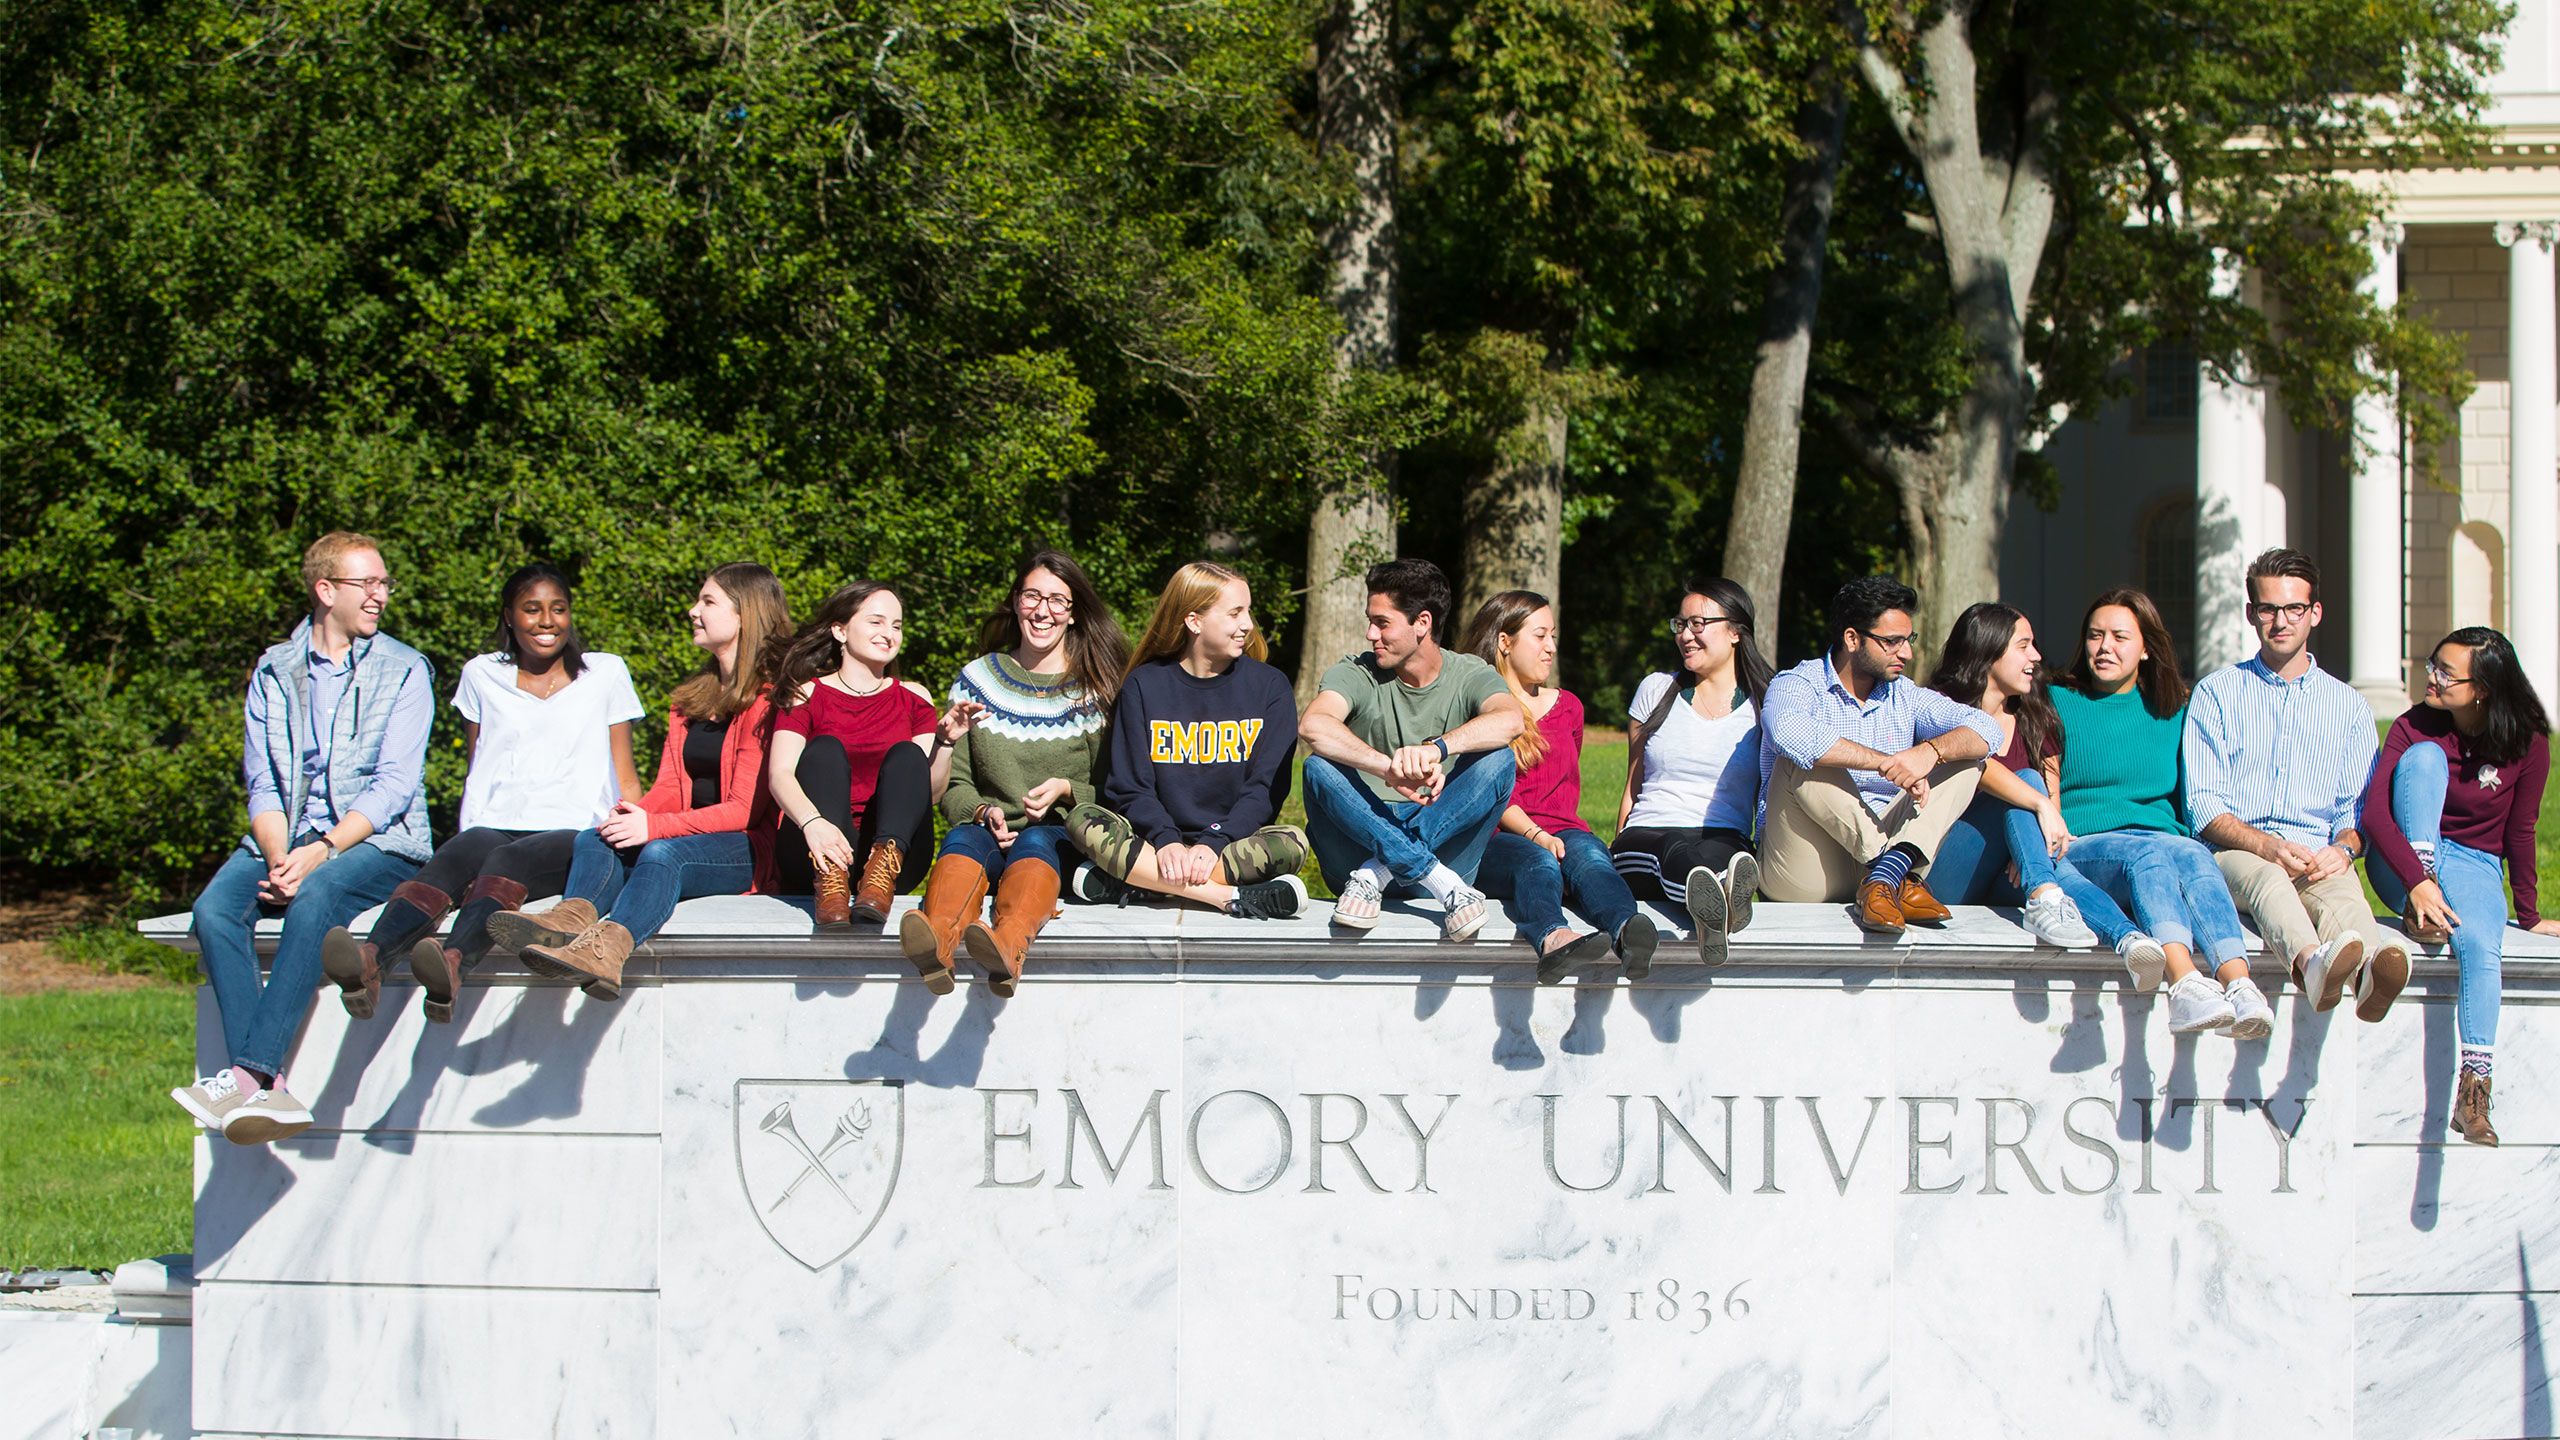 A diverse group of students sits on top of the white marbel wall that markes the entrance to Emory University. The Emory shield and name are carved in the wall.